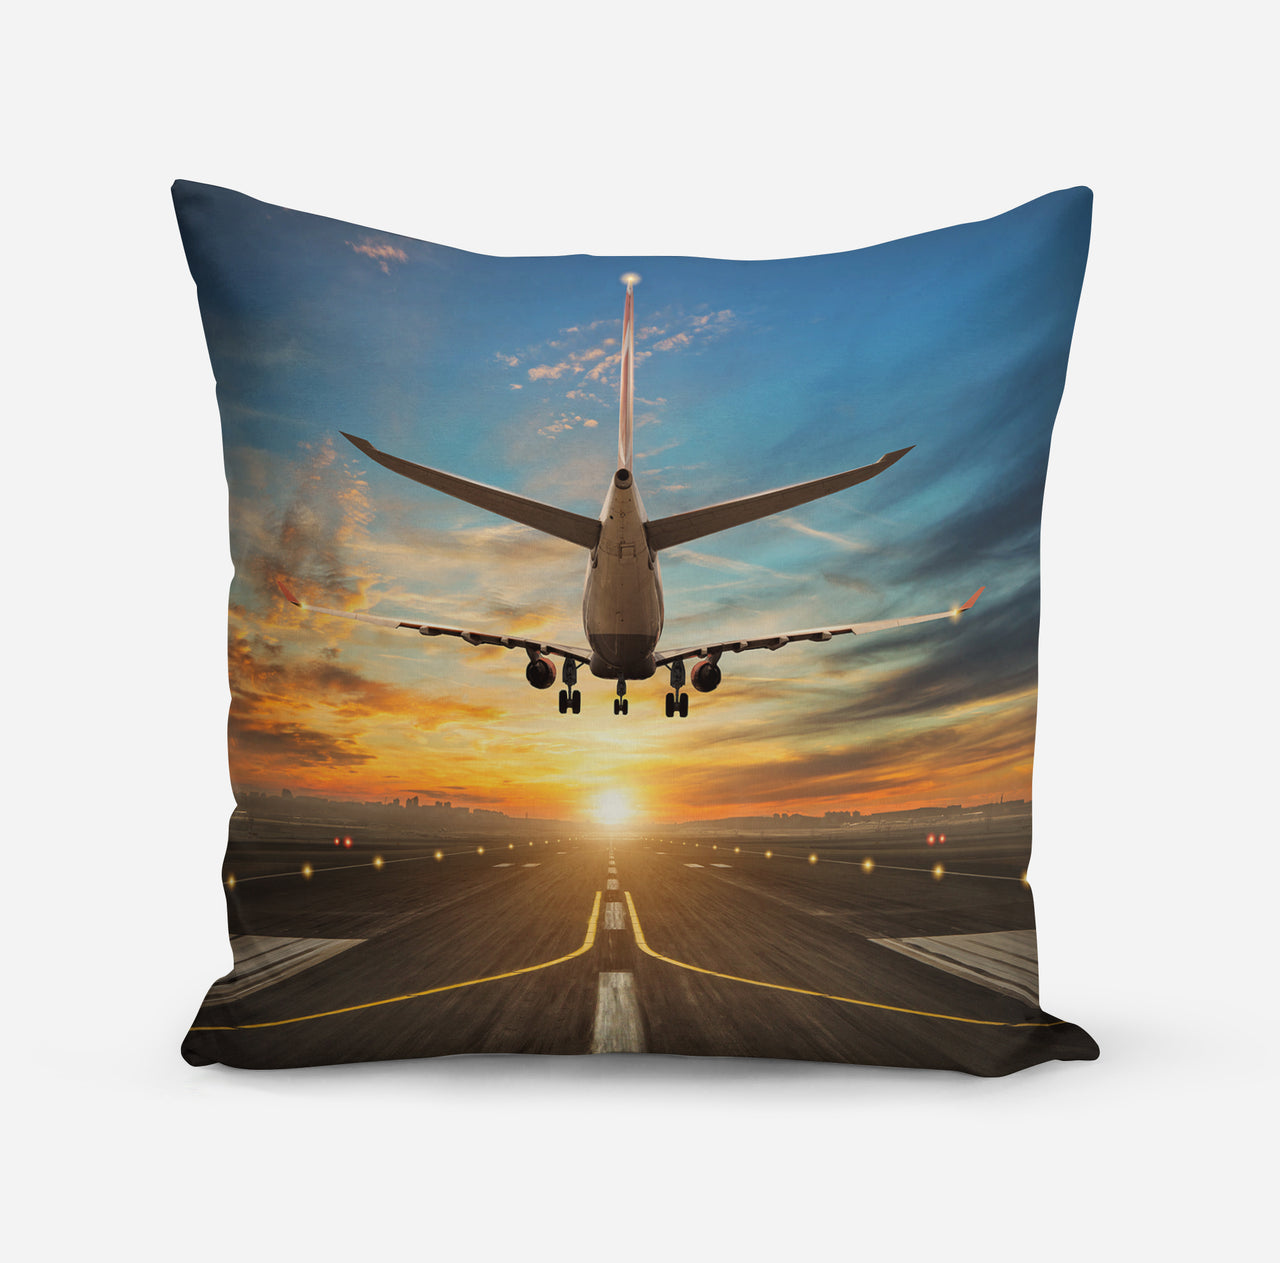 Airplane over Runway Towards the Sunrise Designed Pillows